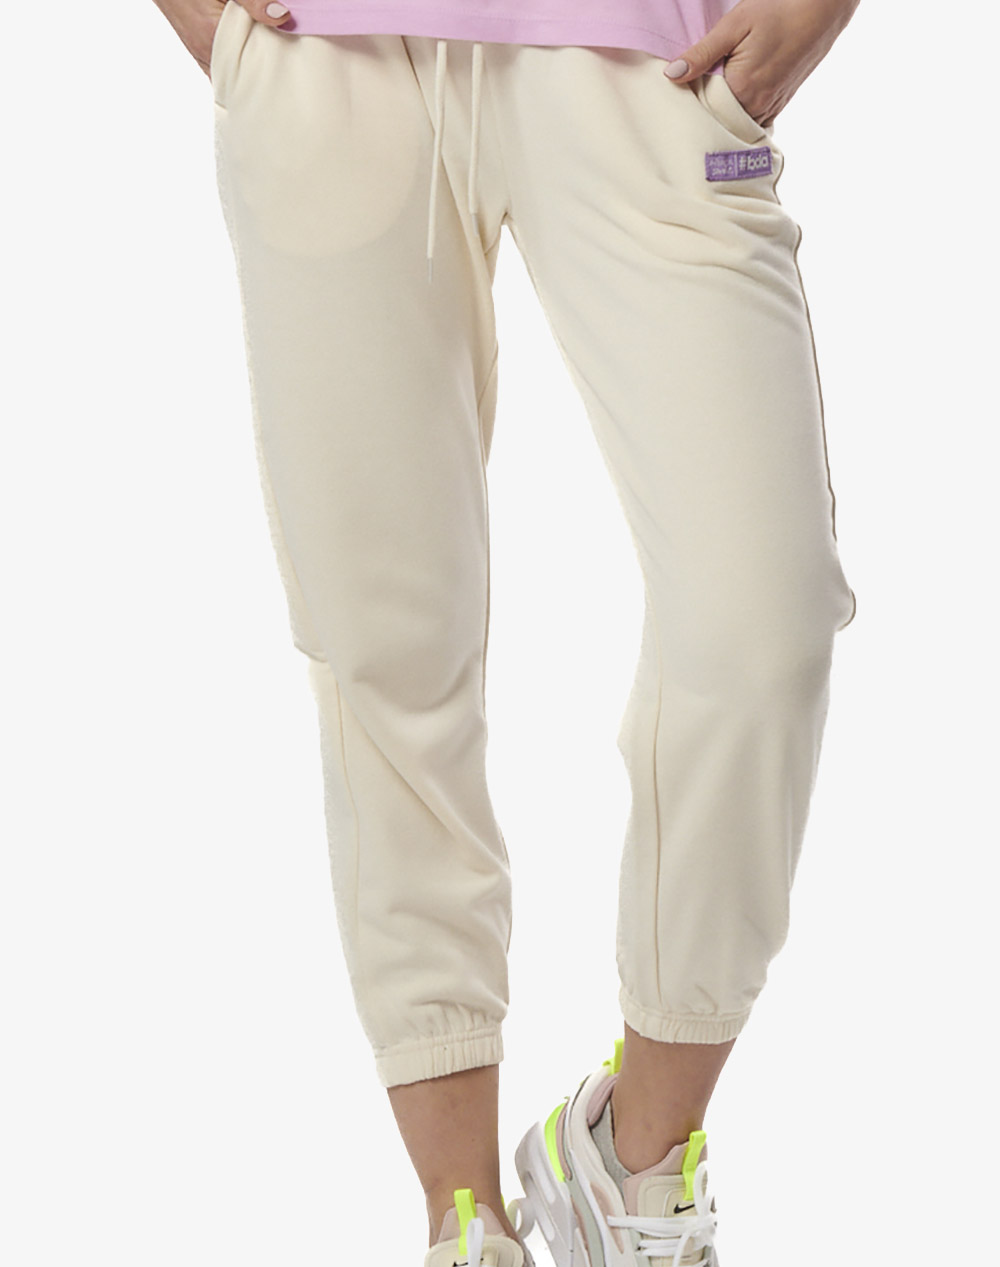 BODY ACTION WOMEN”S HIGH WAIST PANTS 021434-01-Antique White OffWhite